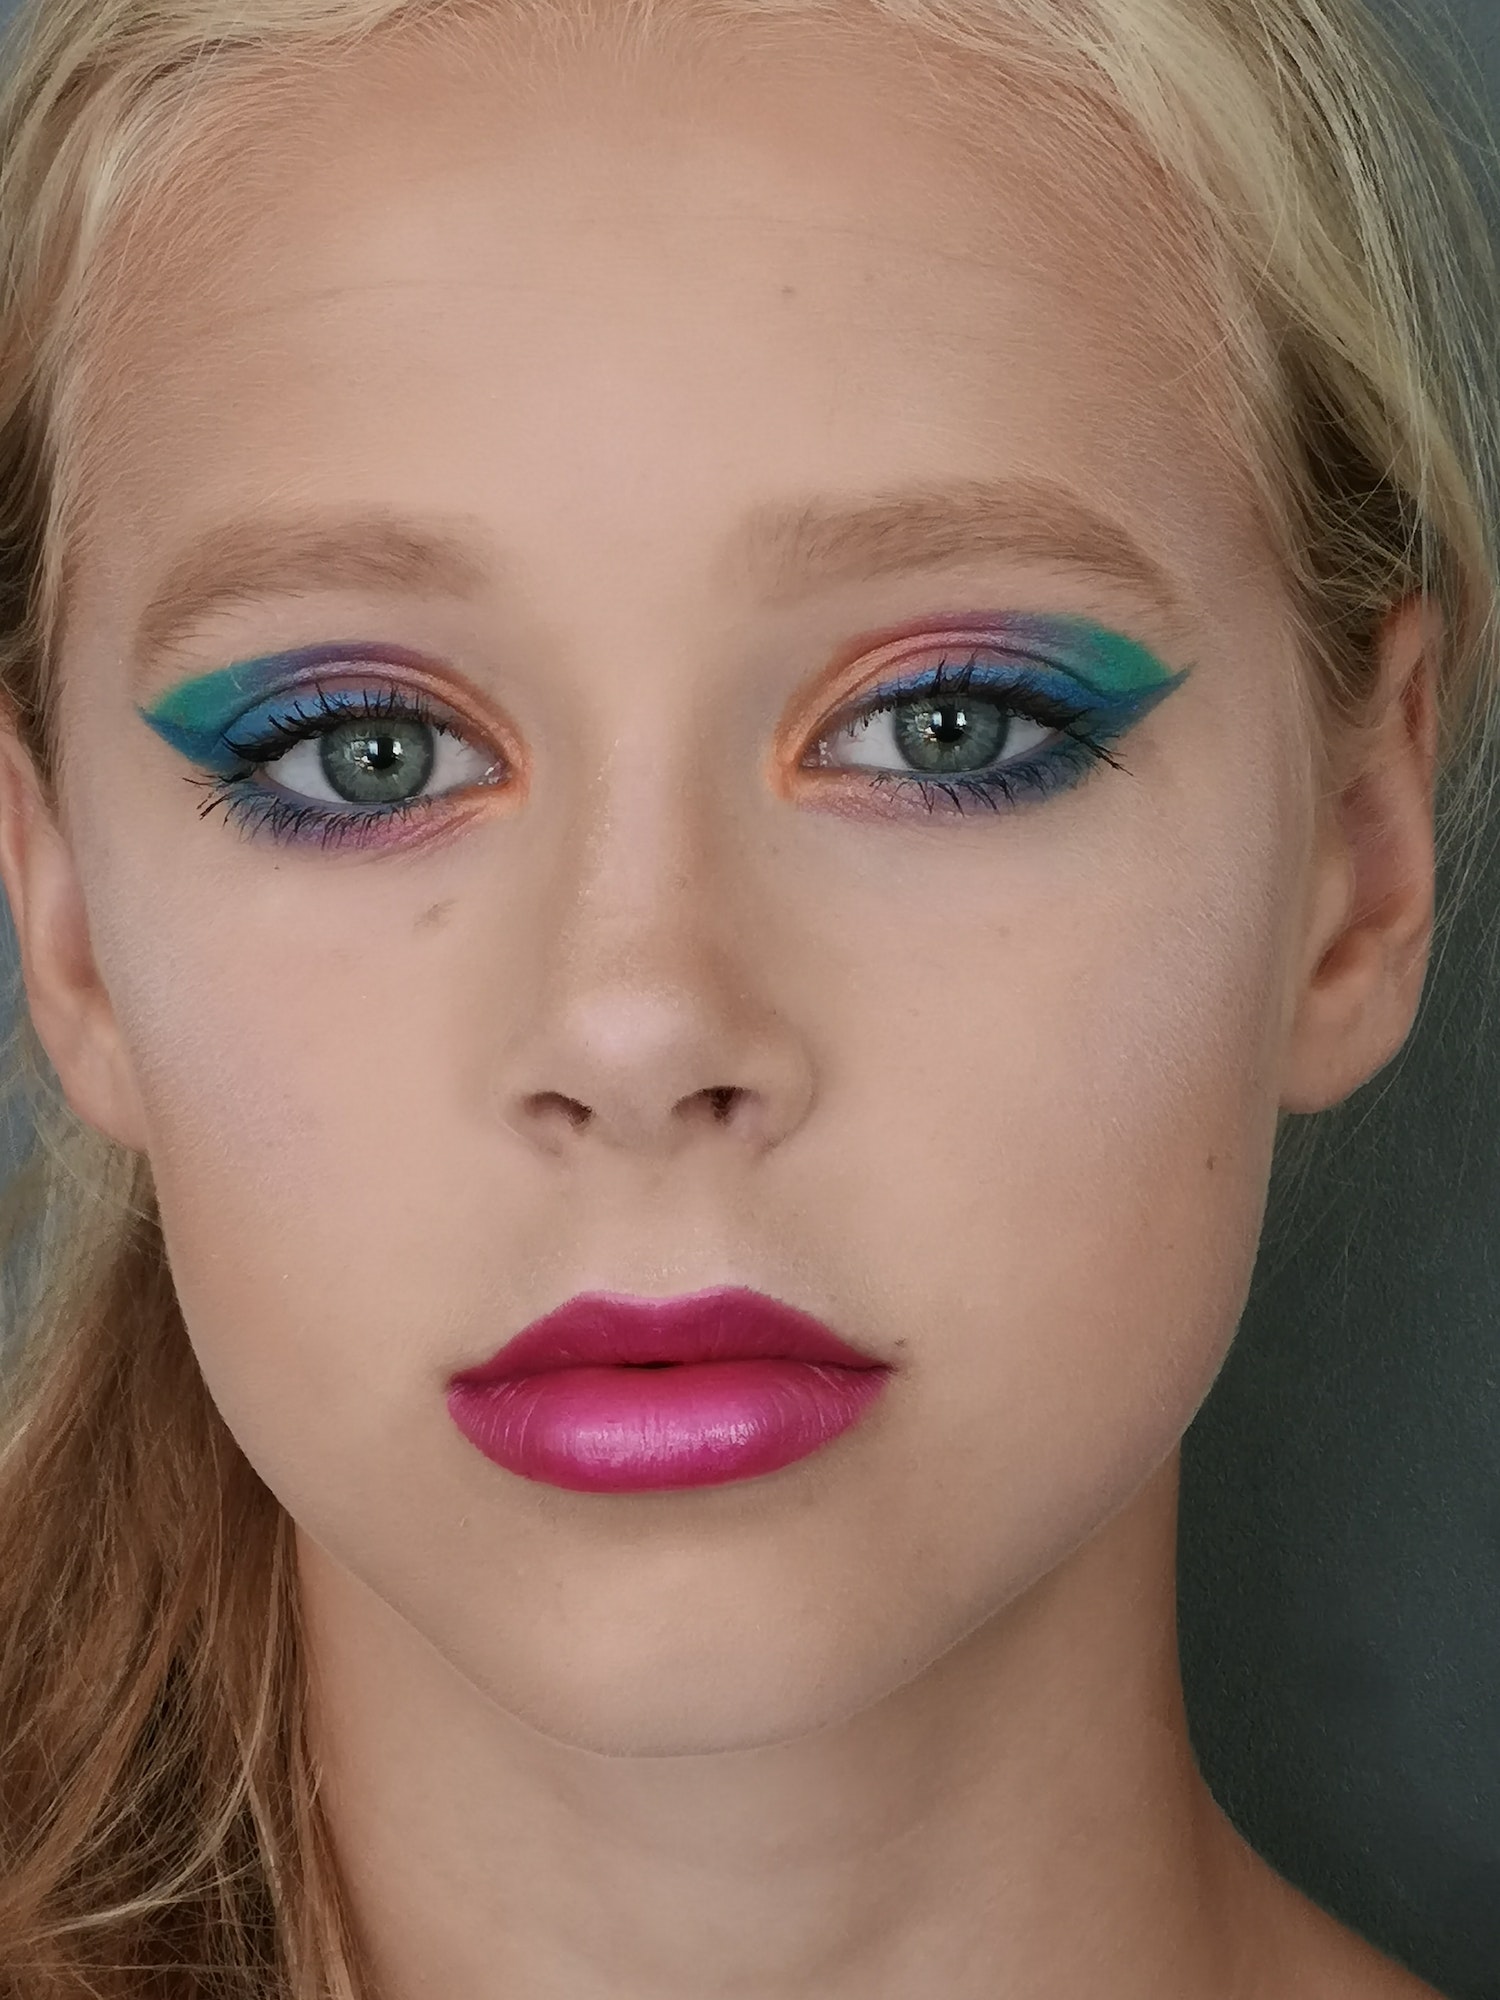 Girl face with pink lipstick and rainbow colored eye makeup